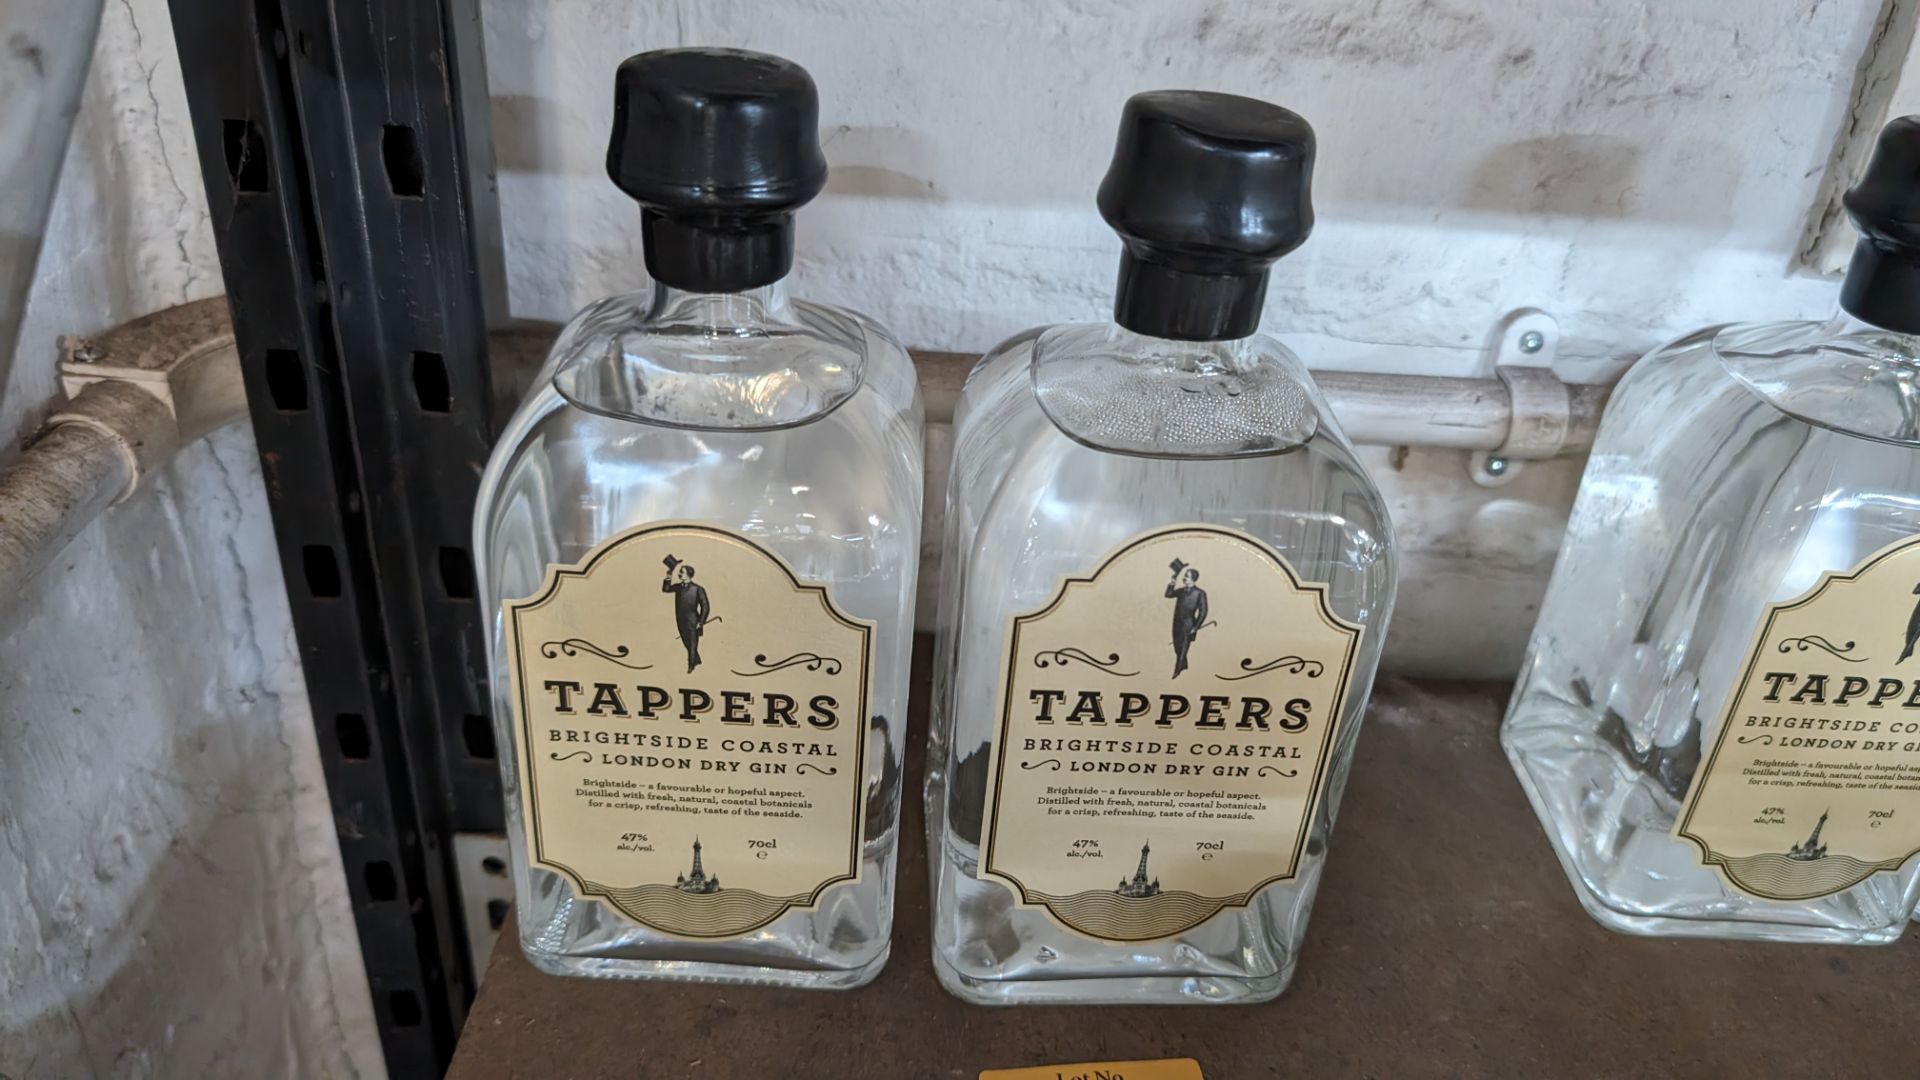 2 off 700ml bottles of Tappers 47% ABV Brightside Coastal London Dry Gin. Individually numbered bot